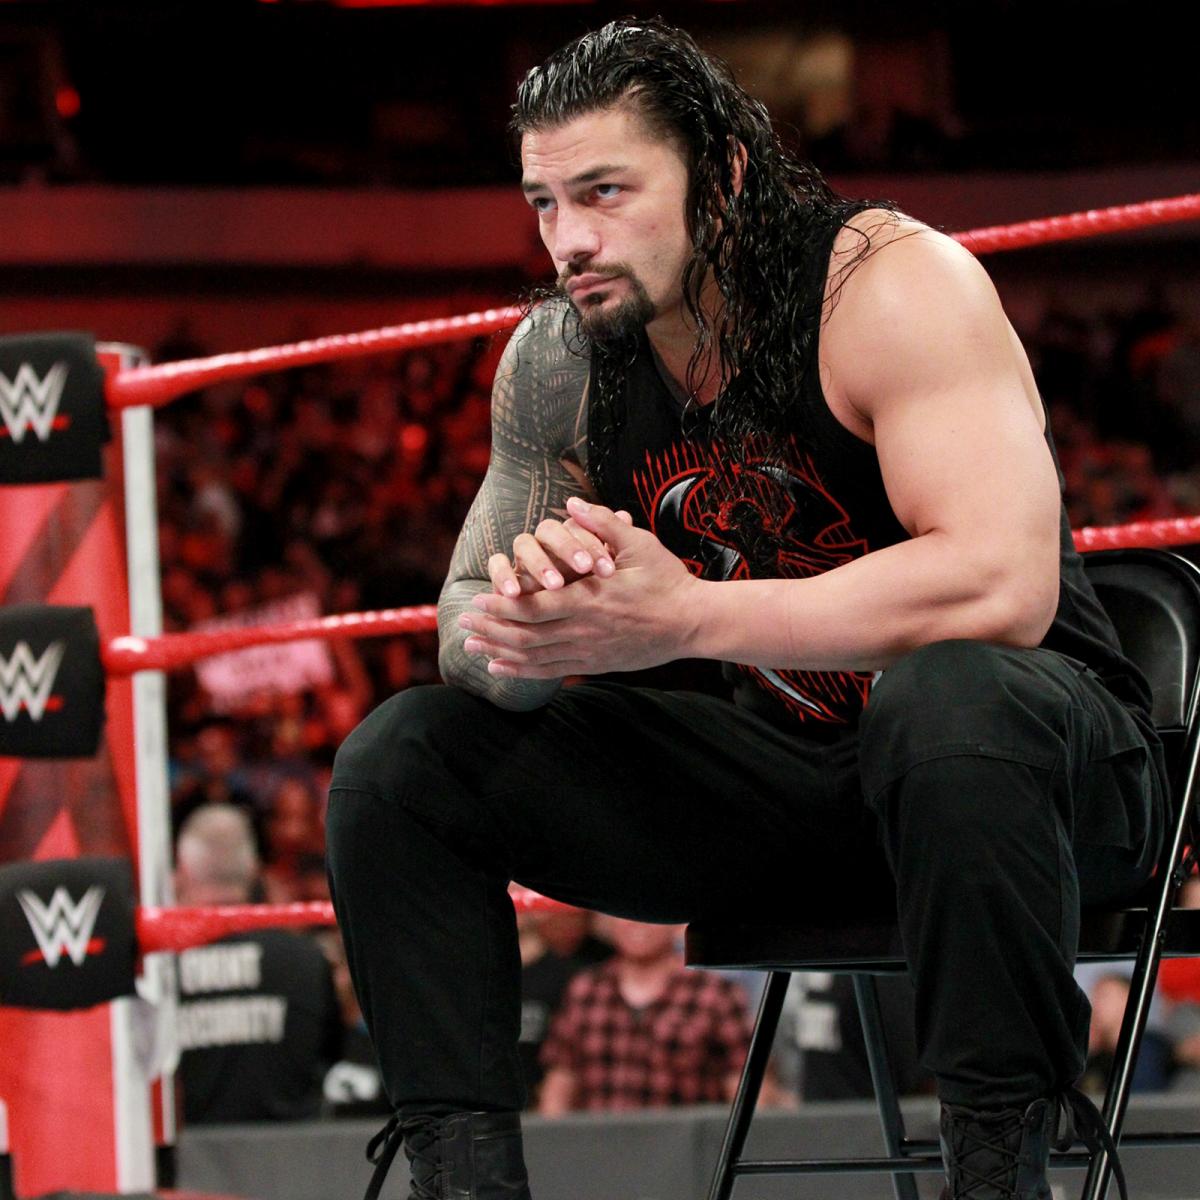 Braun Strowman Provides Update On Roman Reigns Saying “It’s A Day To Day Thing”